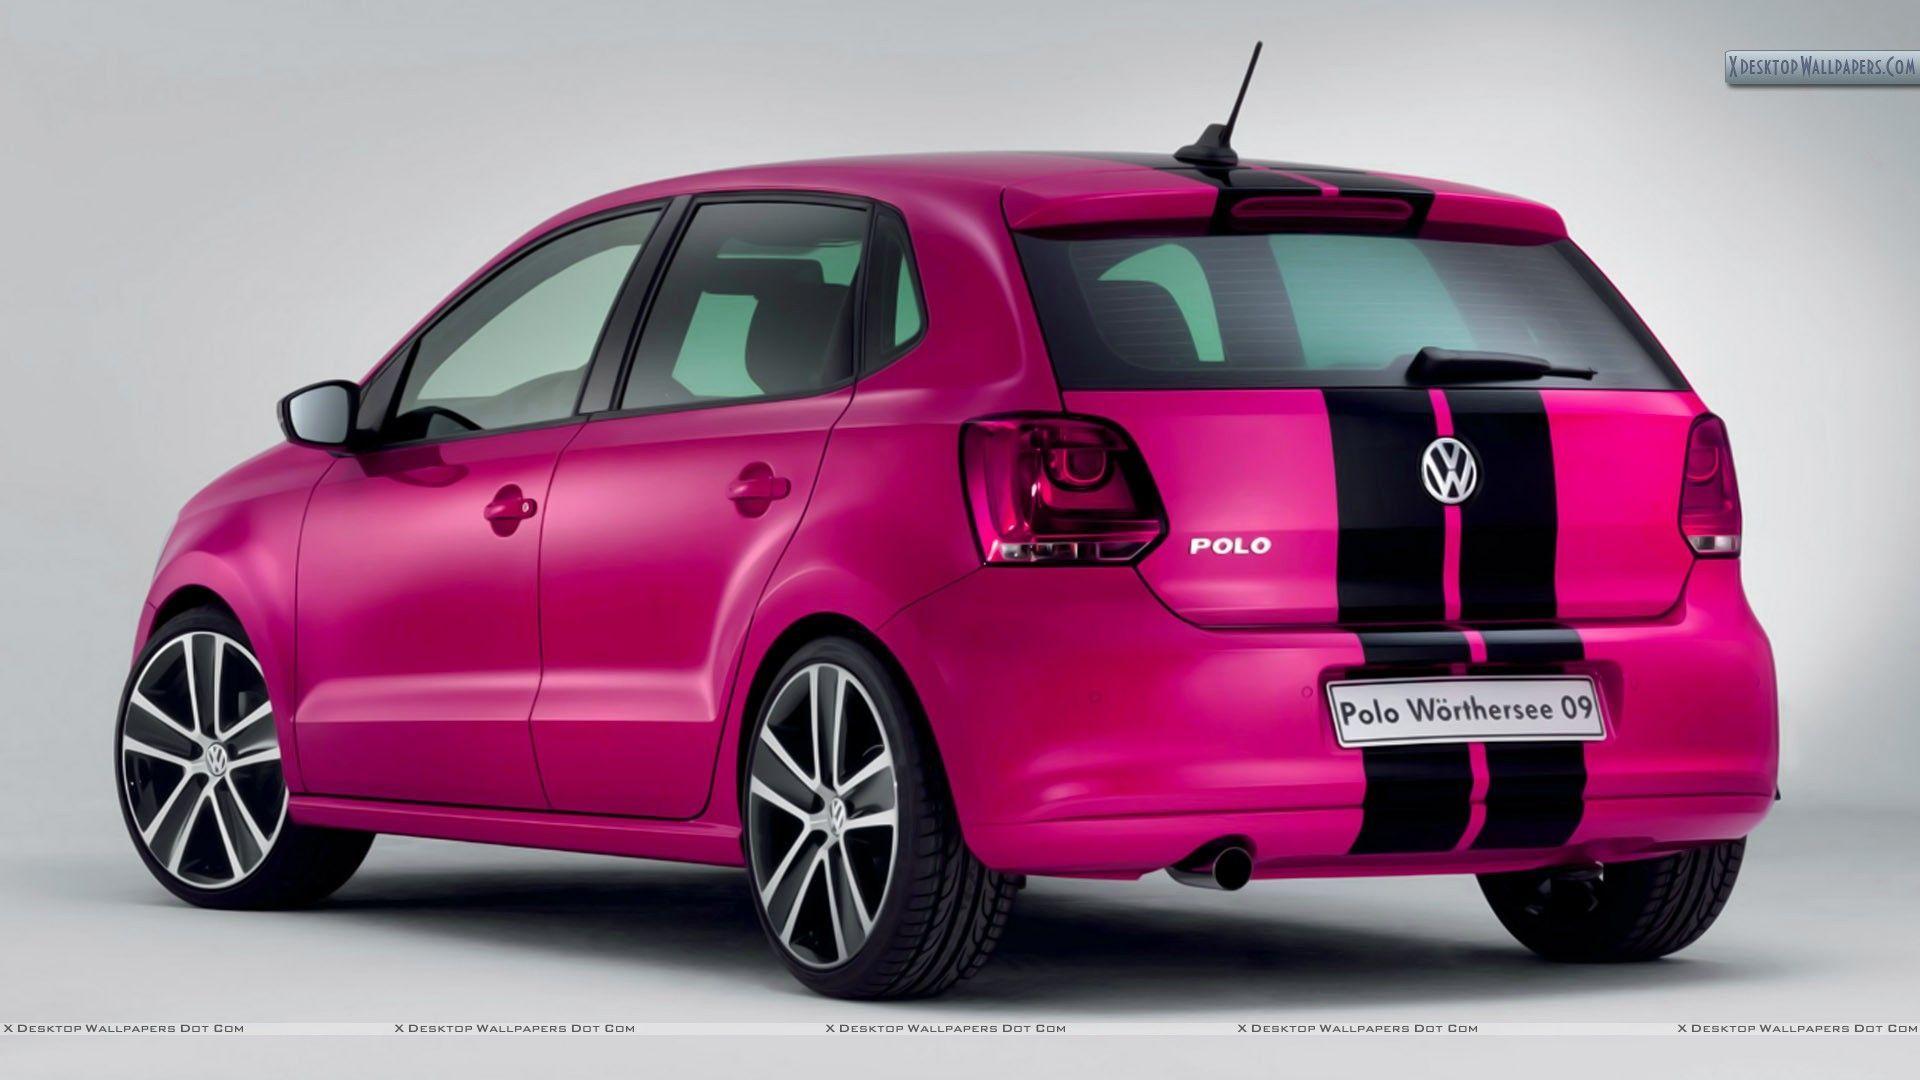 Pink Cars Wallpaper, Photo & Image in HD